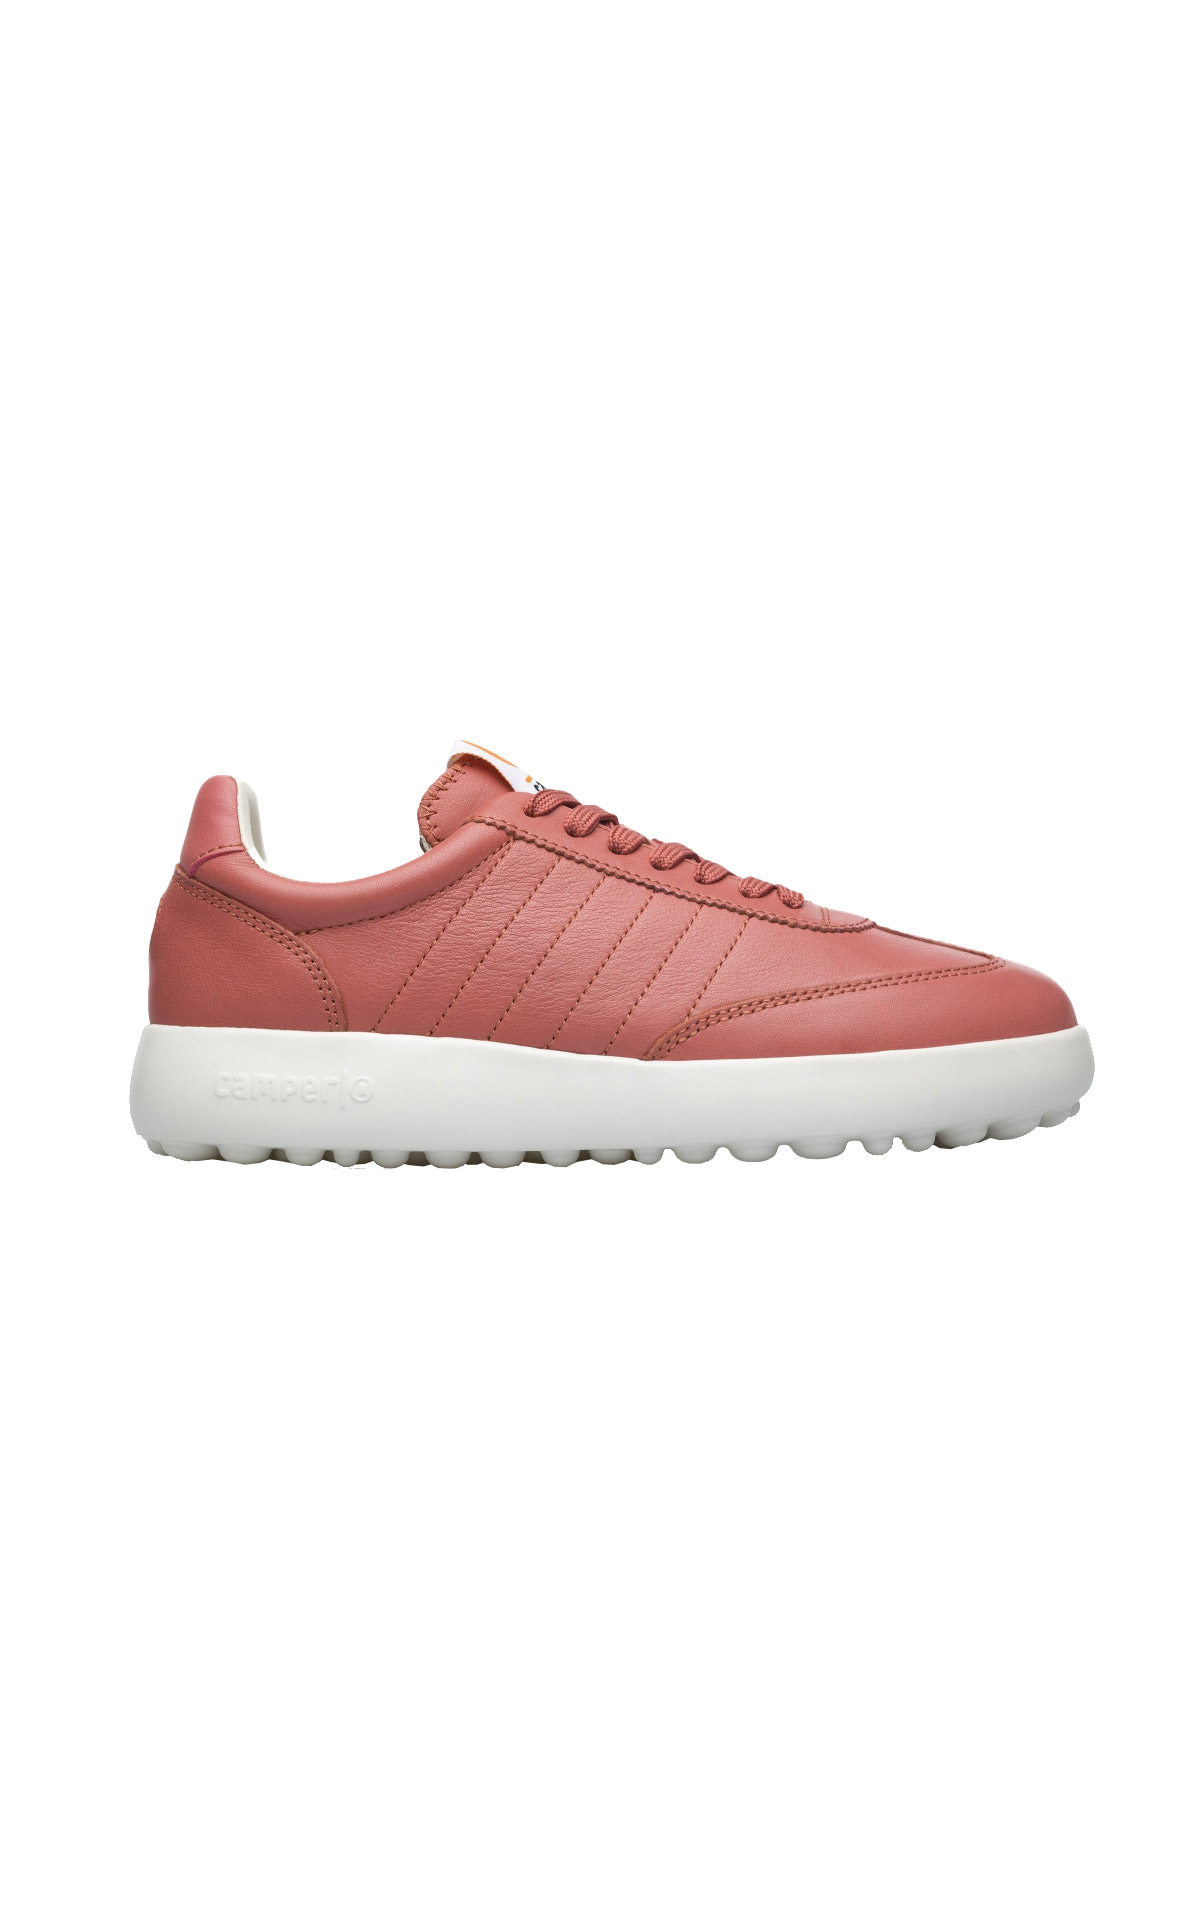 Red leather sneaker for women. Removable insole and white 100% EVA sole. Camper